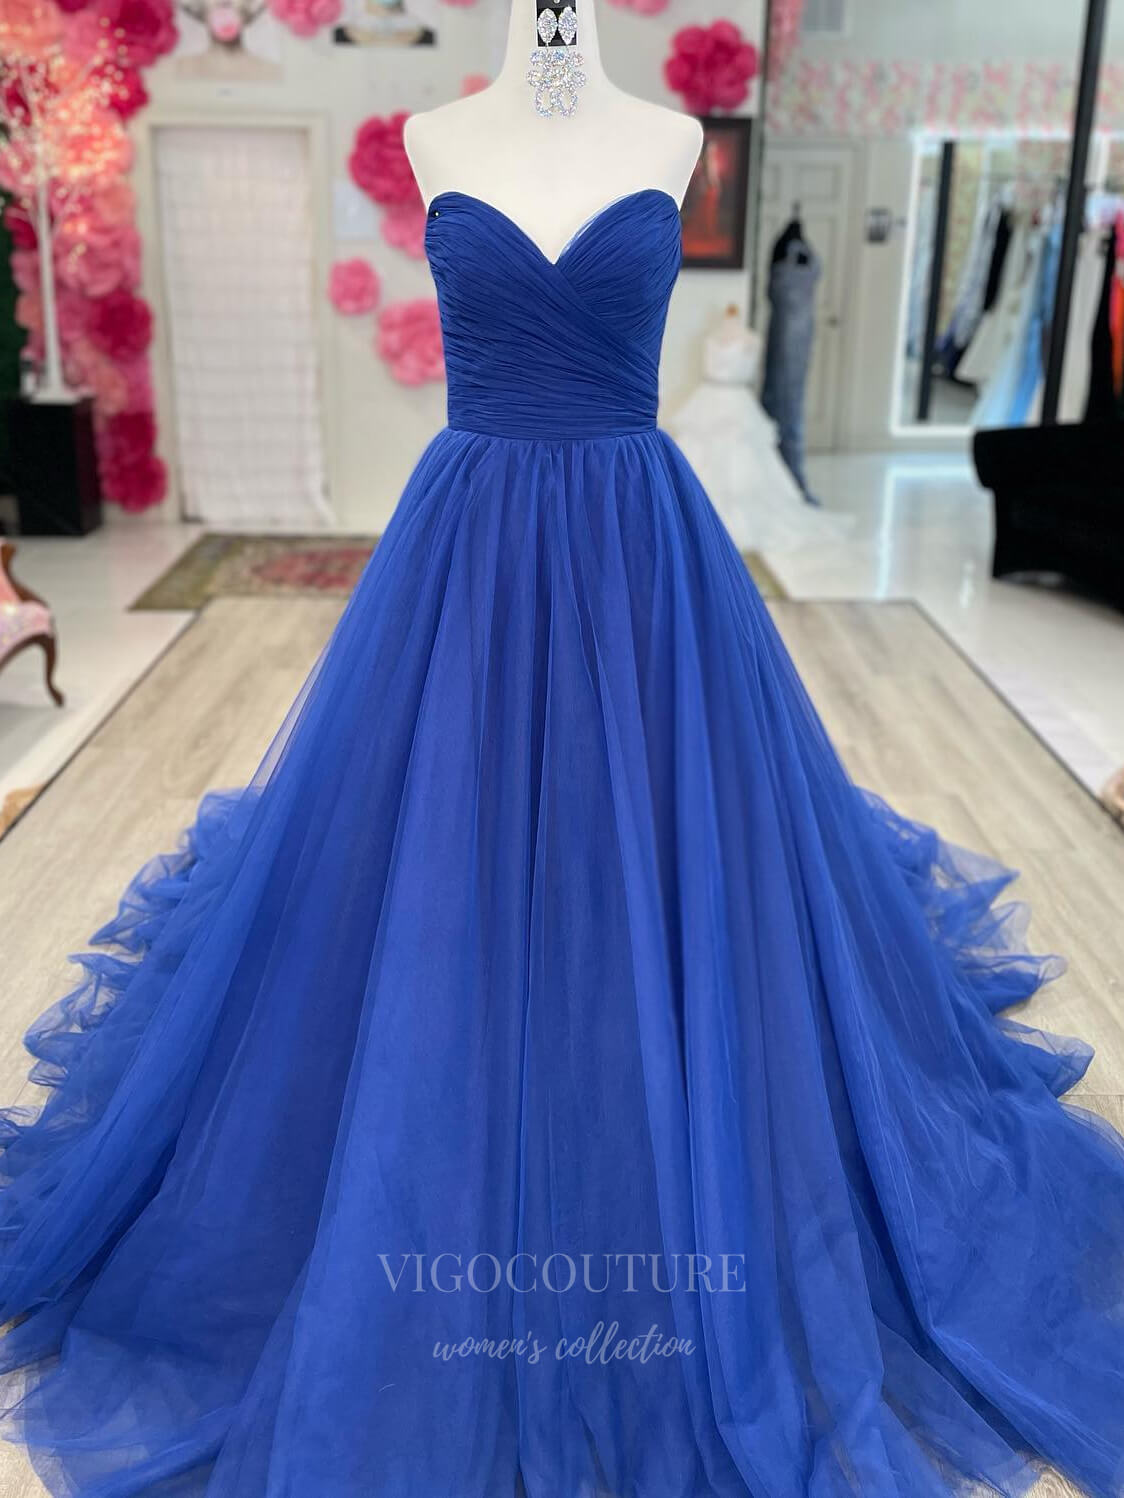 vigocouture-Strapless Pleated Tulle Strapless Prom Dress 20973-Prom Dresses-vigocouture-Blue-US2-